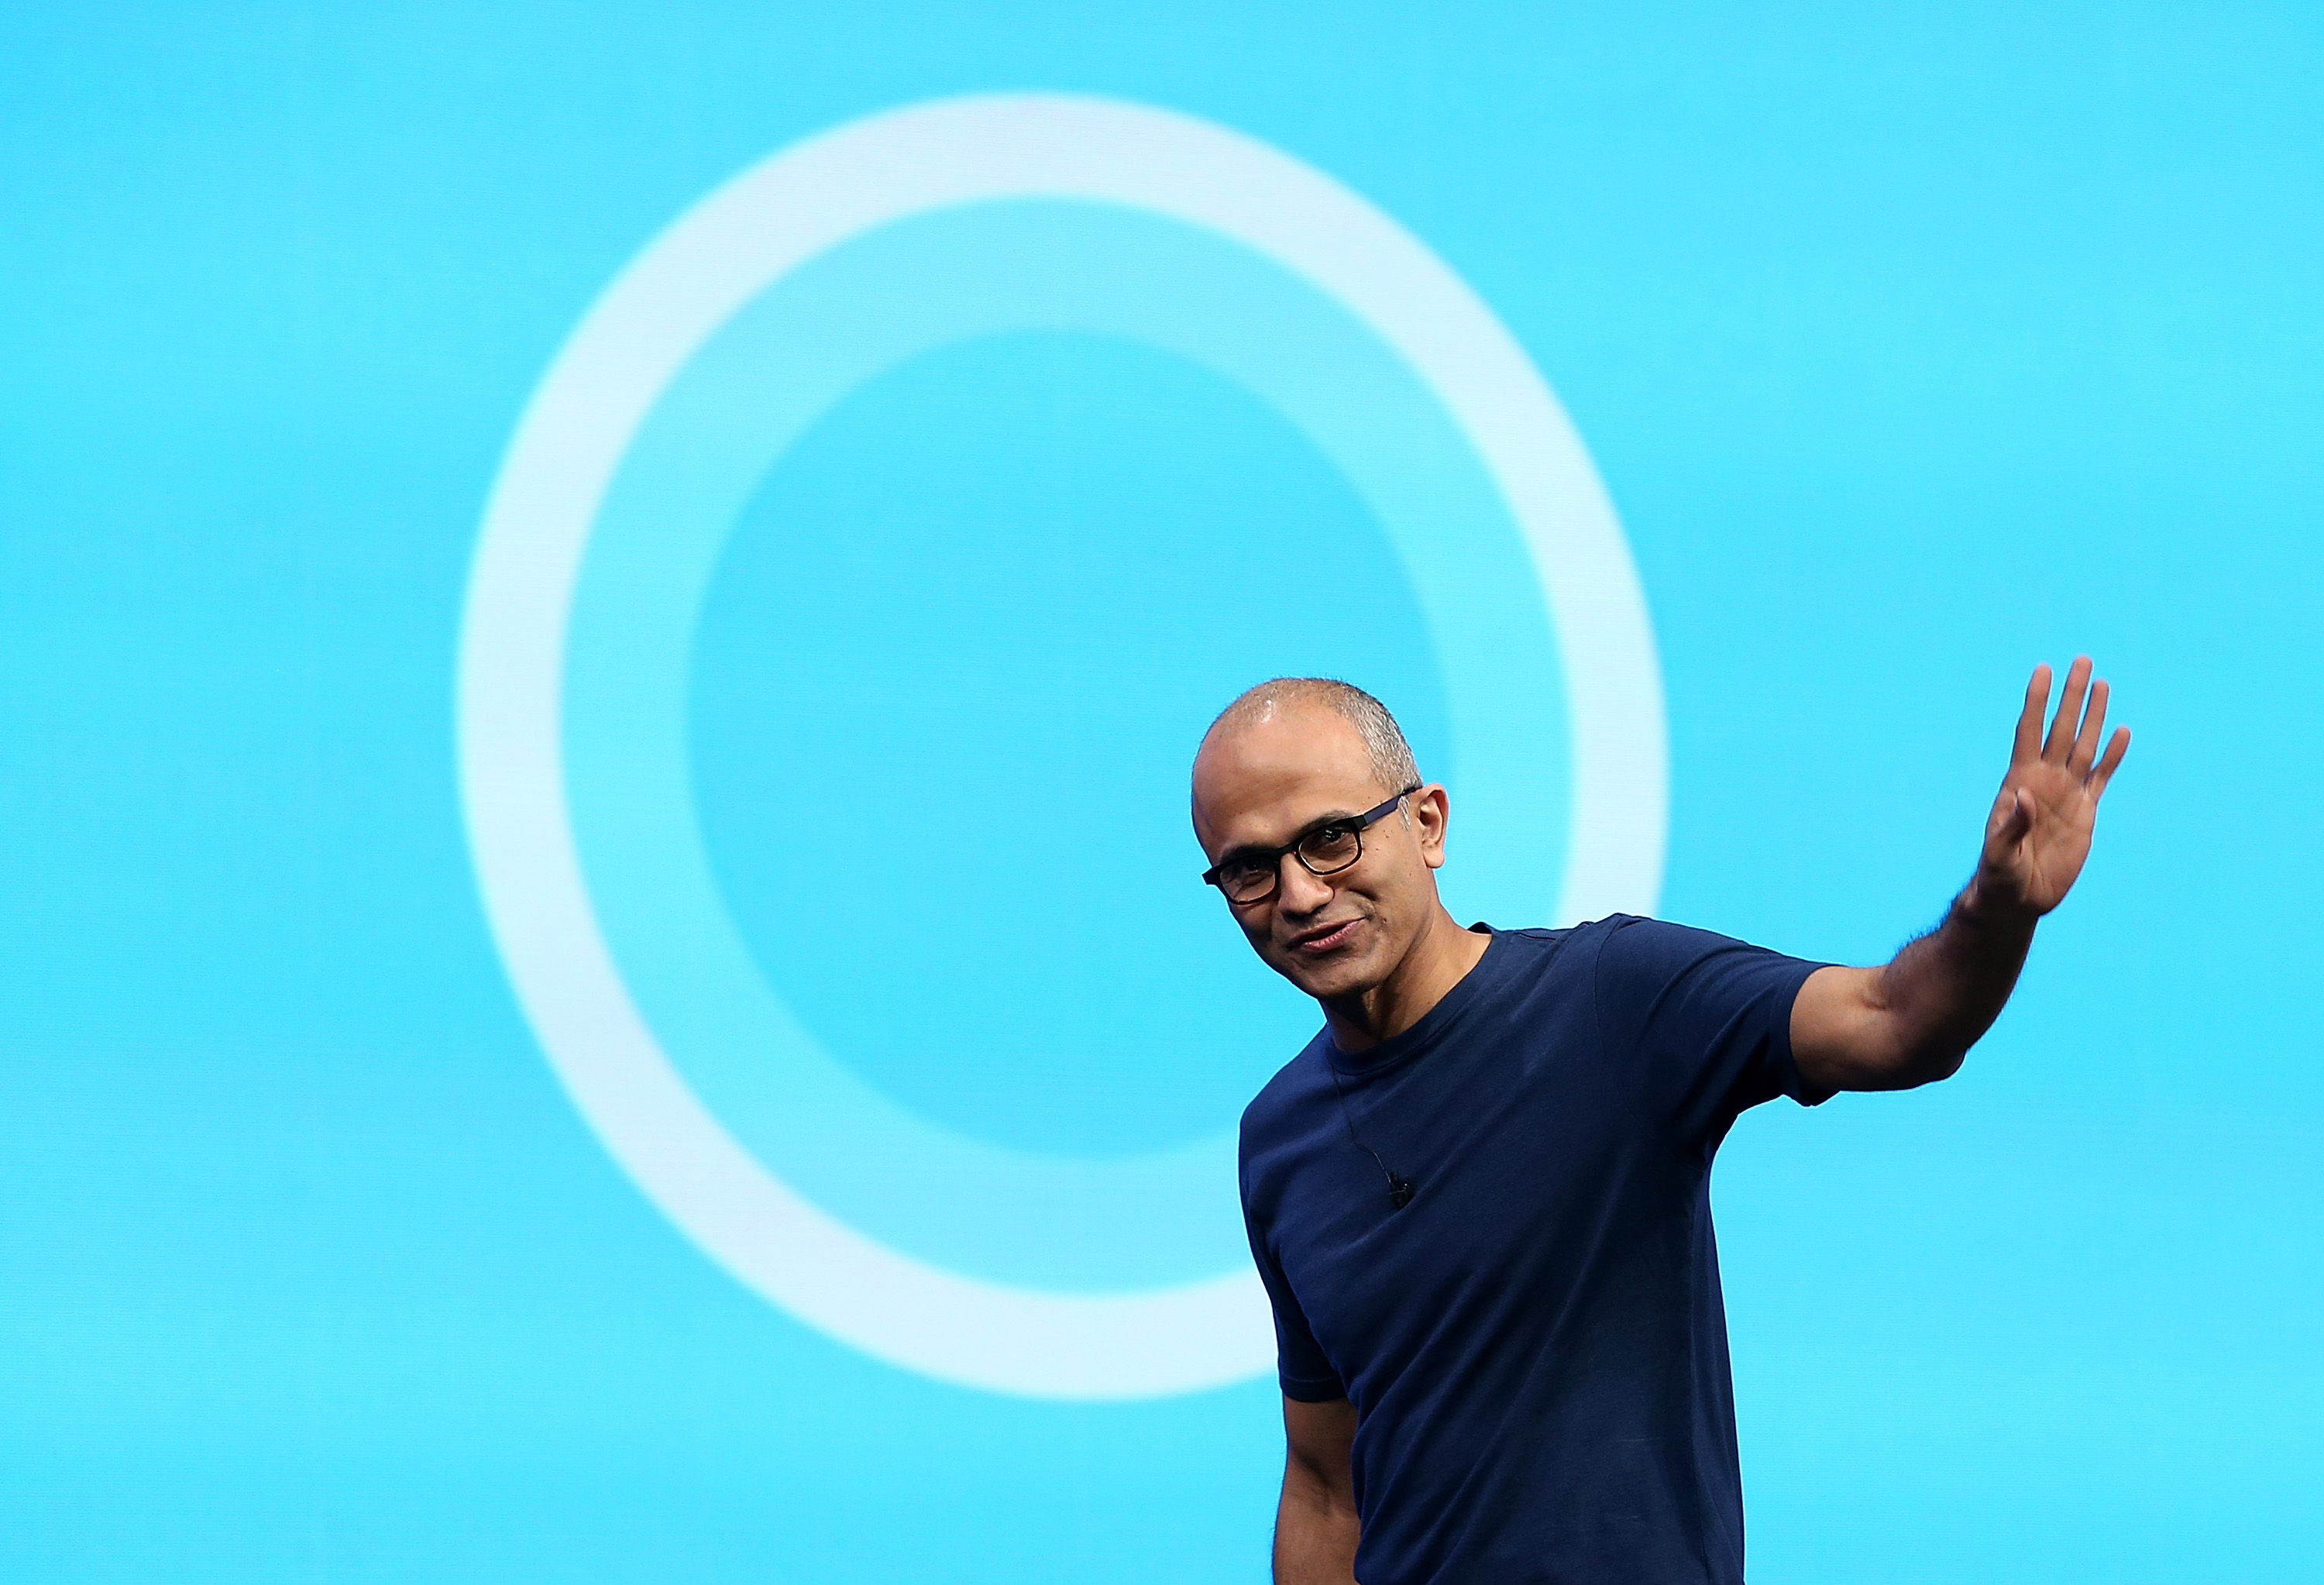 Microsoft CEO Satya Nadella walks in front of the new Cortana logo as he delivers a keynote address during the 2014 Microsoft Build developer conference on April 2, 2014 in San Francisco, California. (Justin Sullivan&mdash;Getty Images)